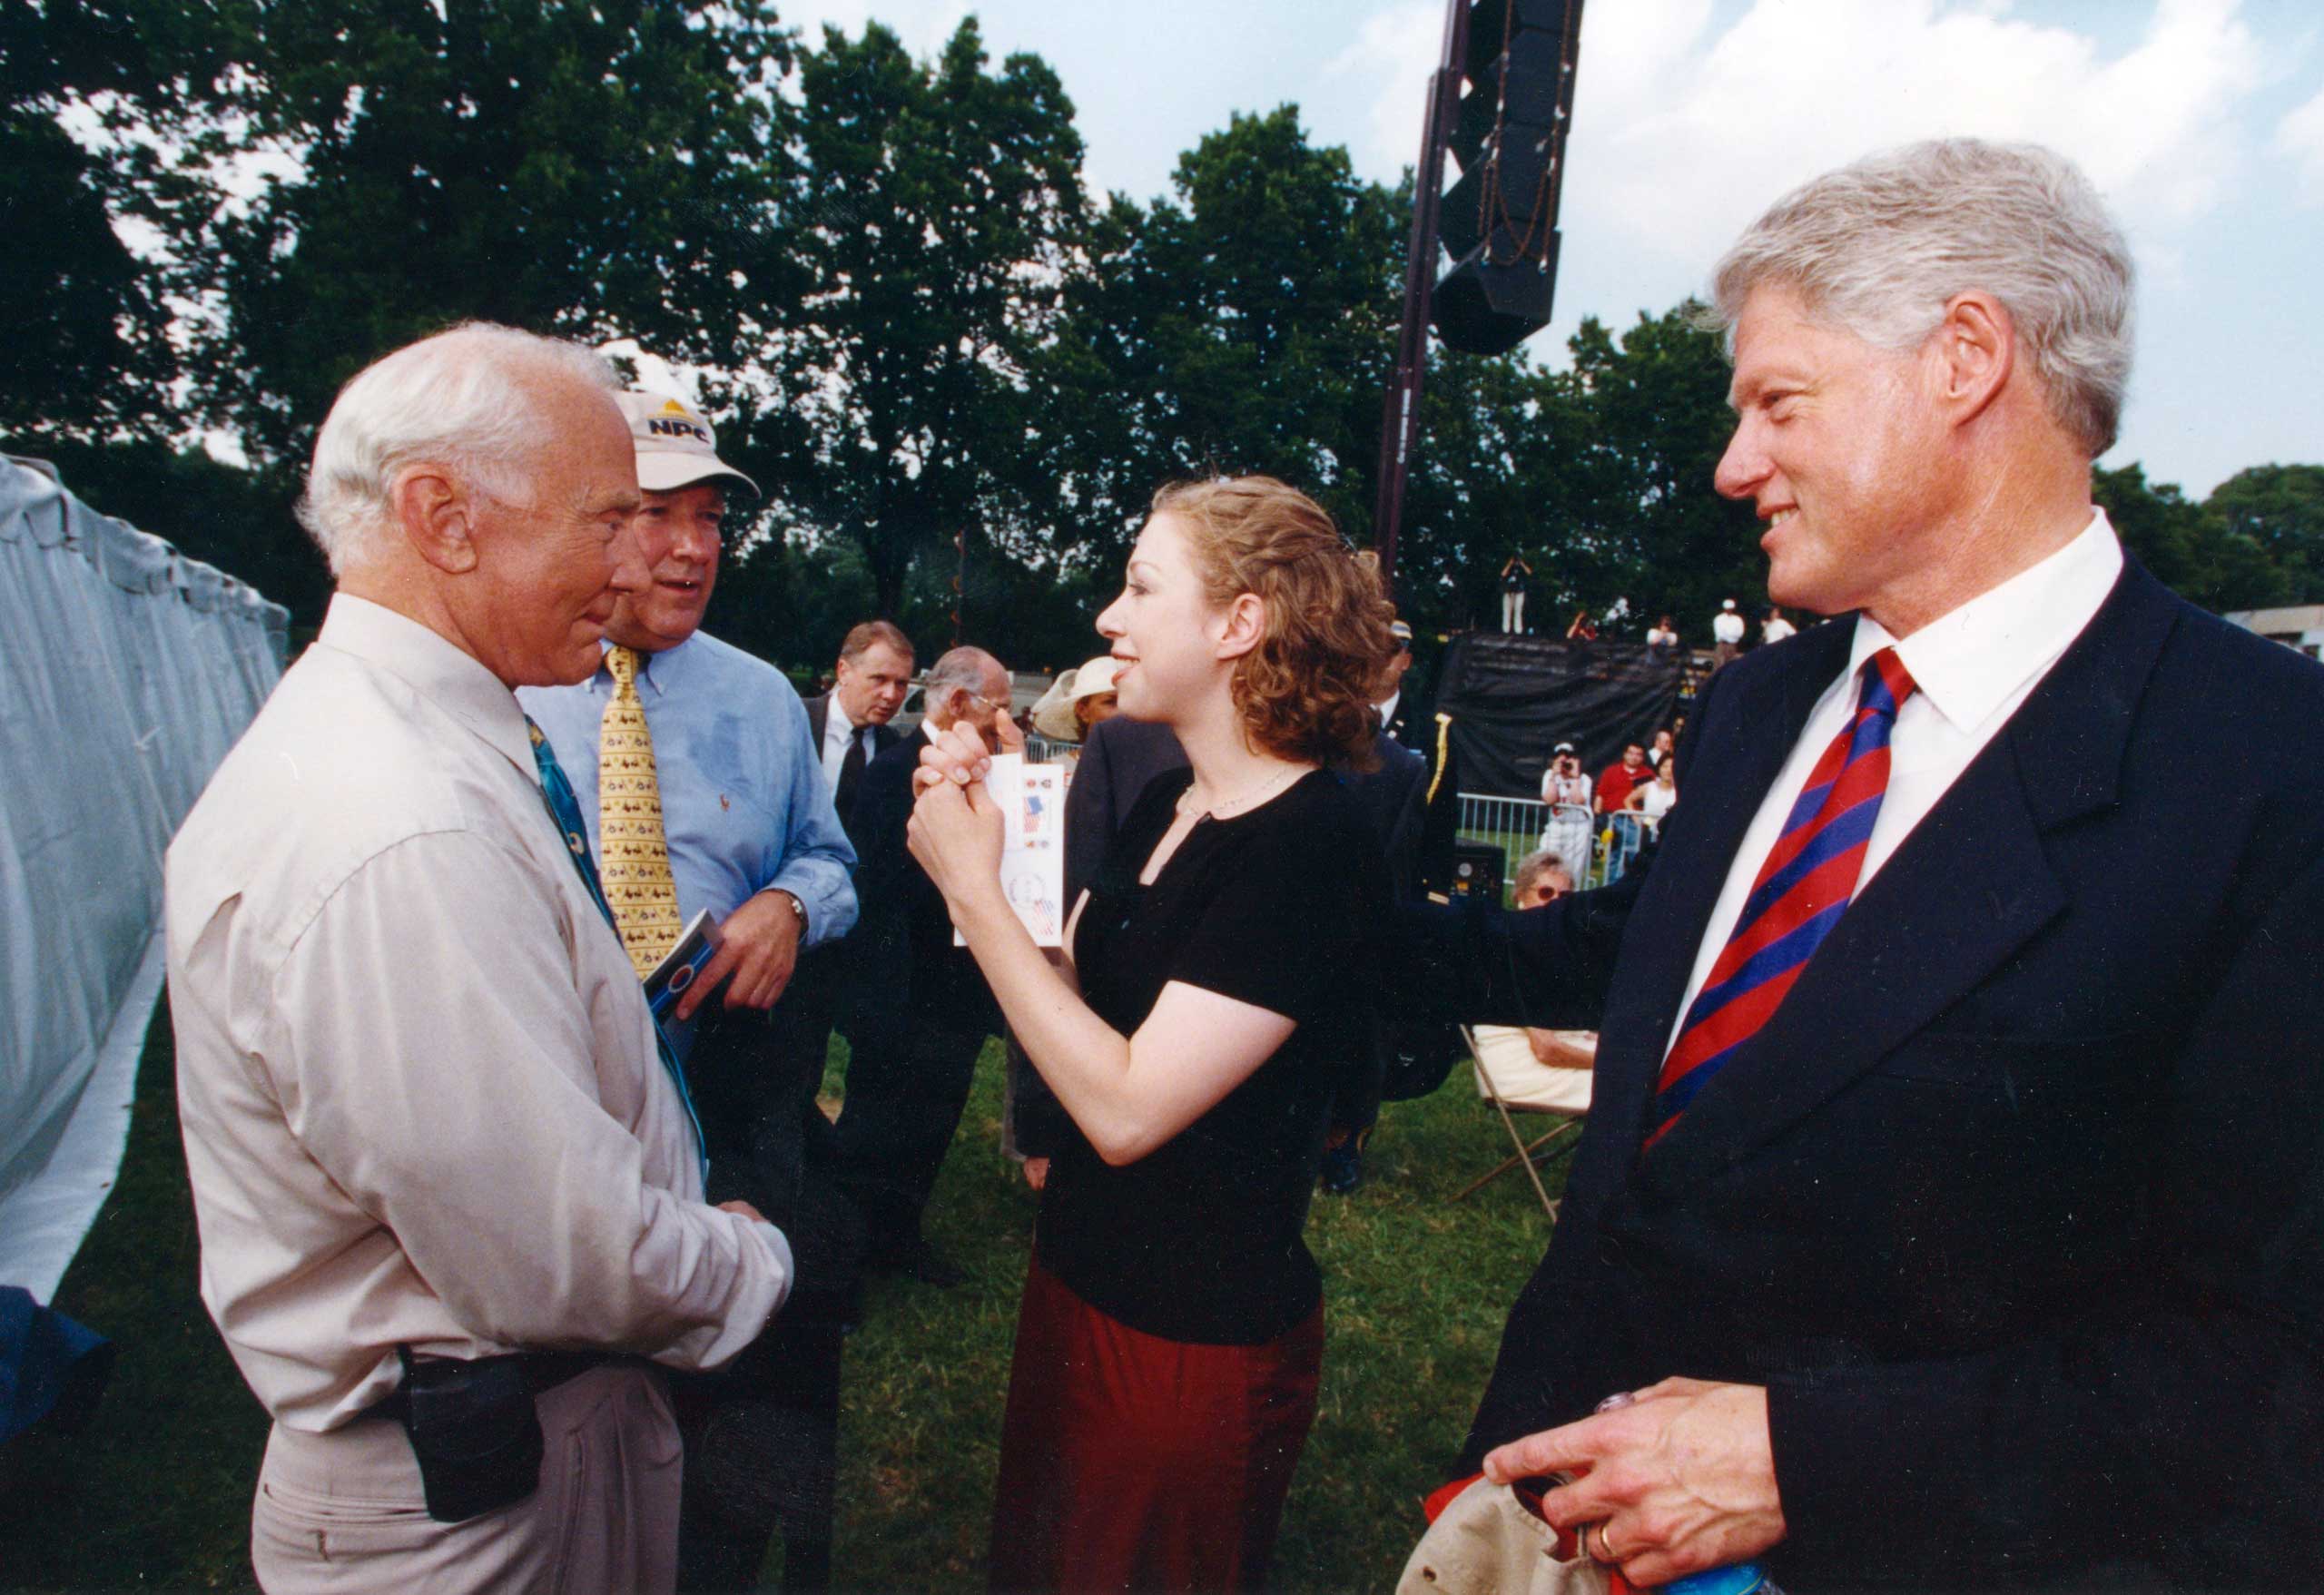 Buzz Aldrin met President Bill Clinton and his daughter Chelsea Clinton at an informal event.